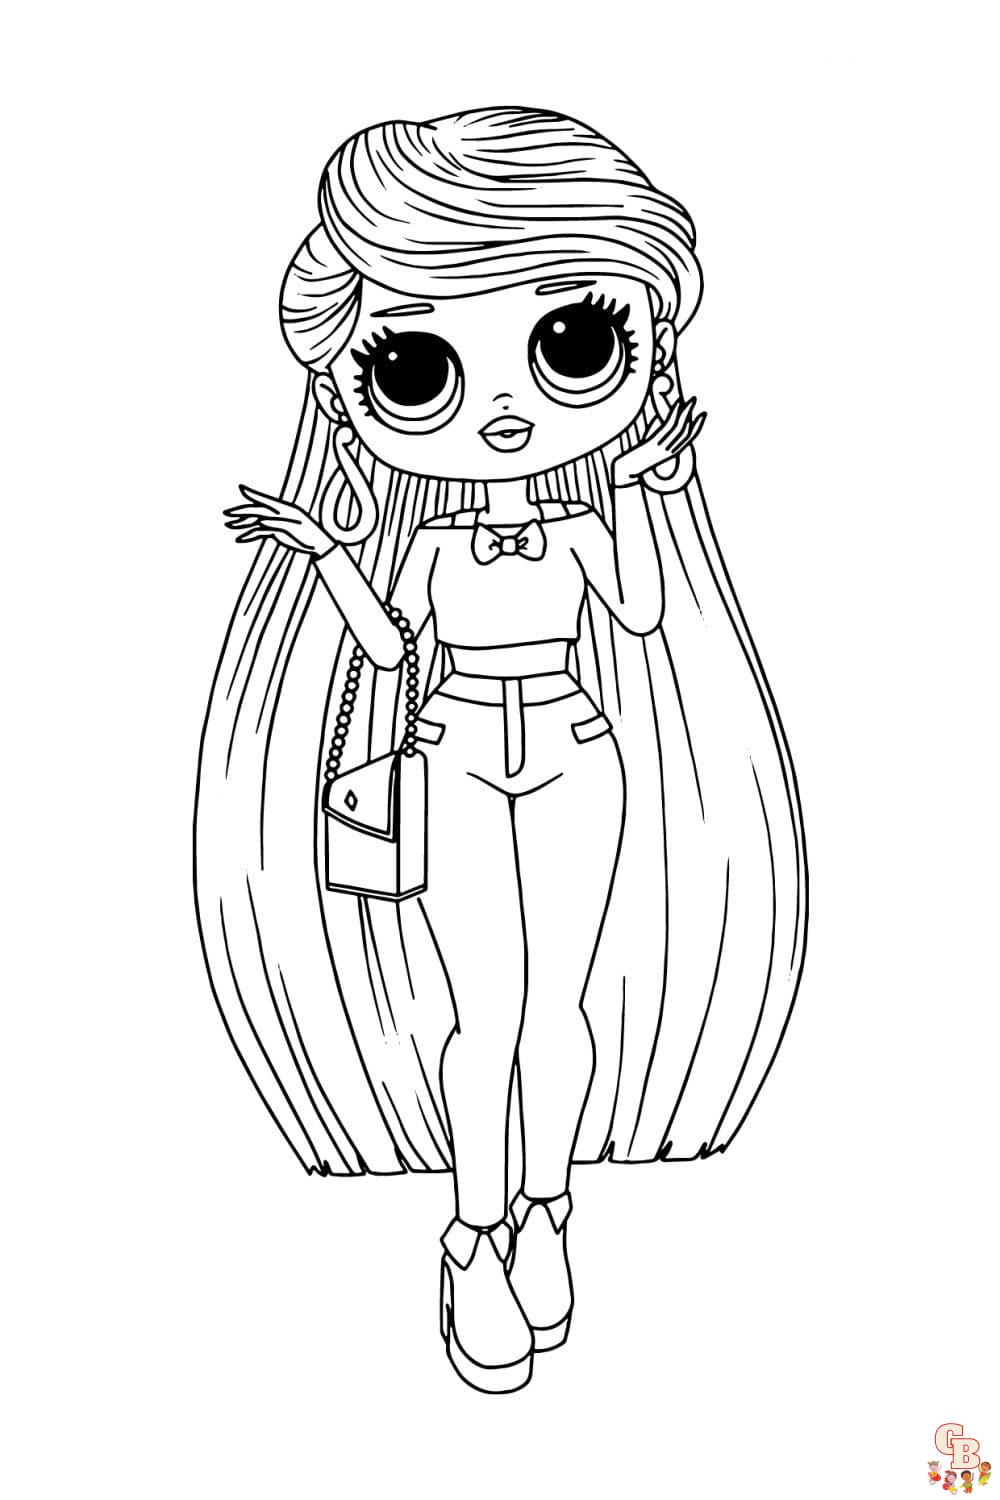 omg fashion lol omg doll coloring pages 11